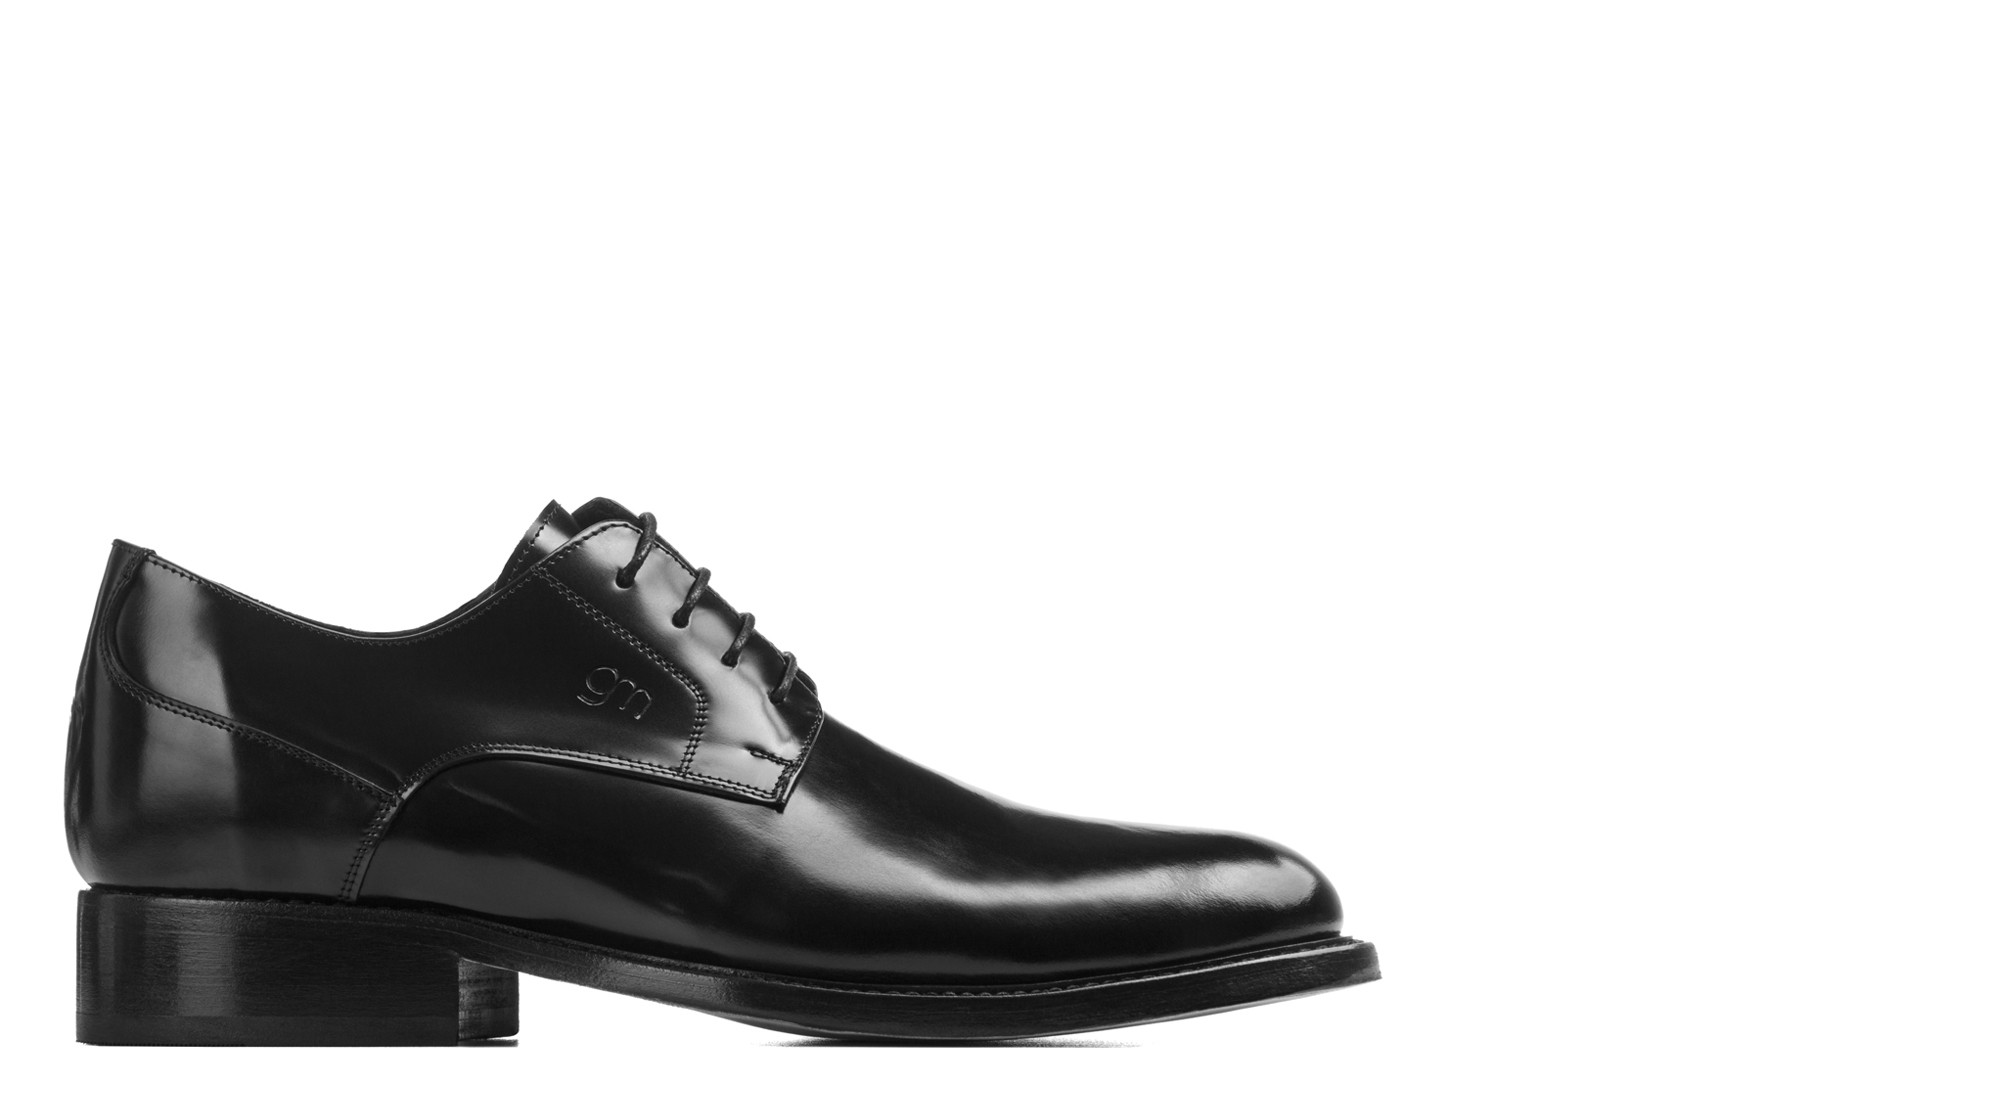 Roswell - Elevator Dress Shoes in Brushed Leather from 2.4 to 3.1 inches